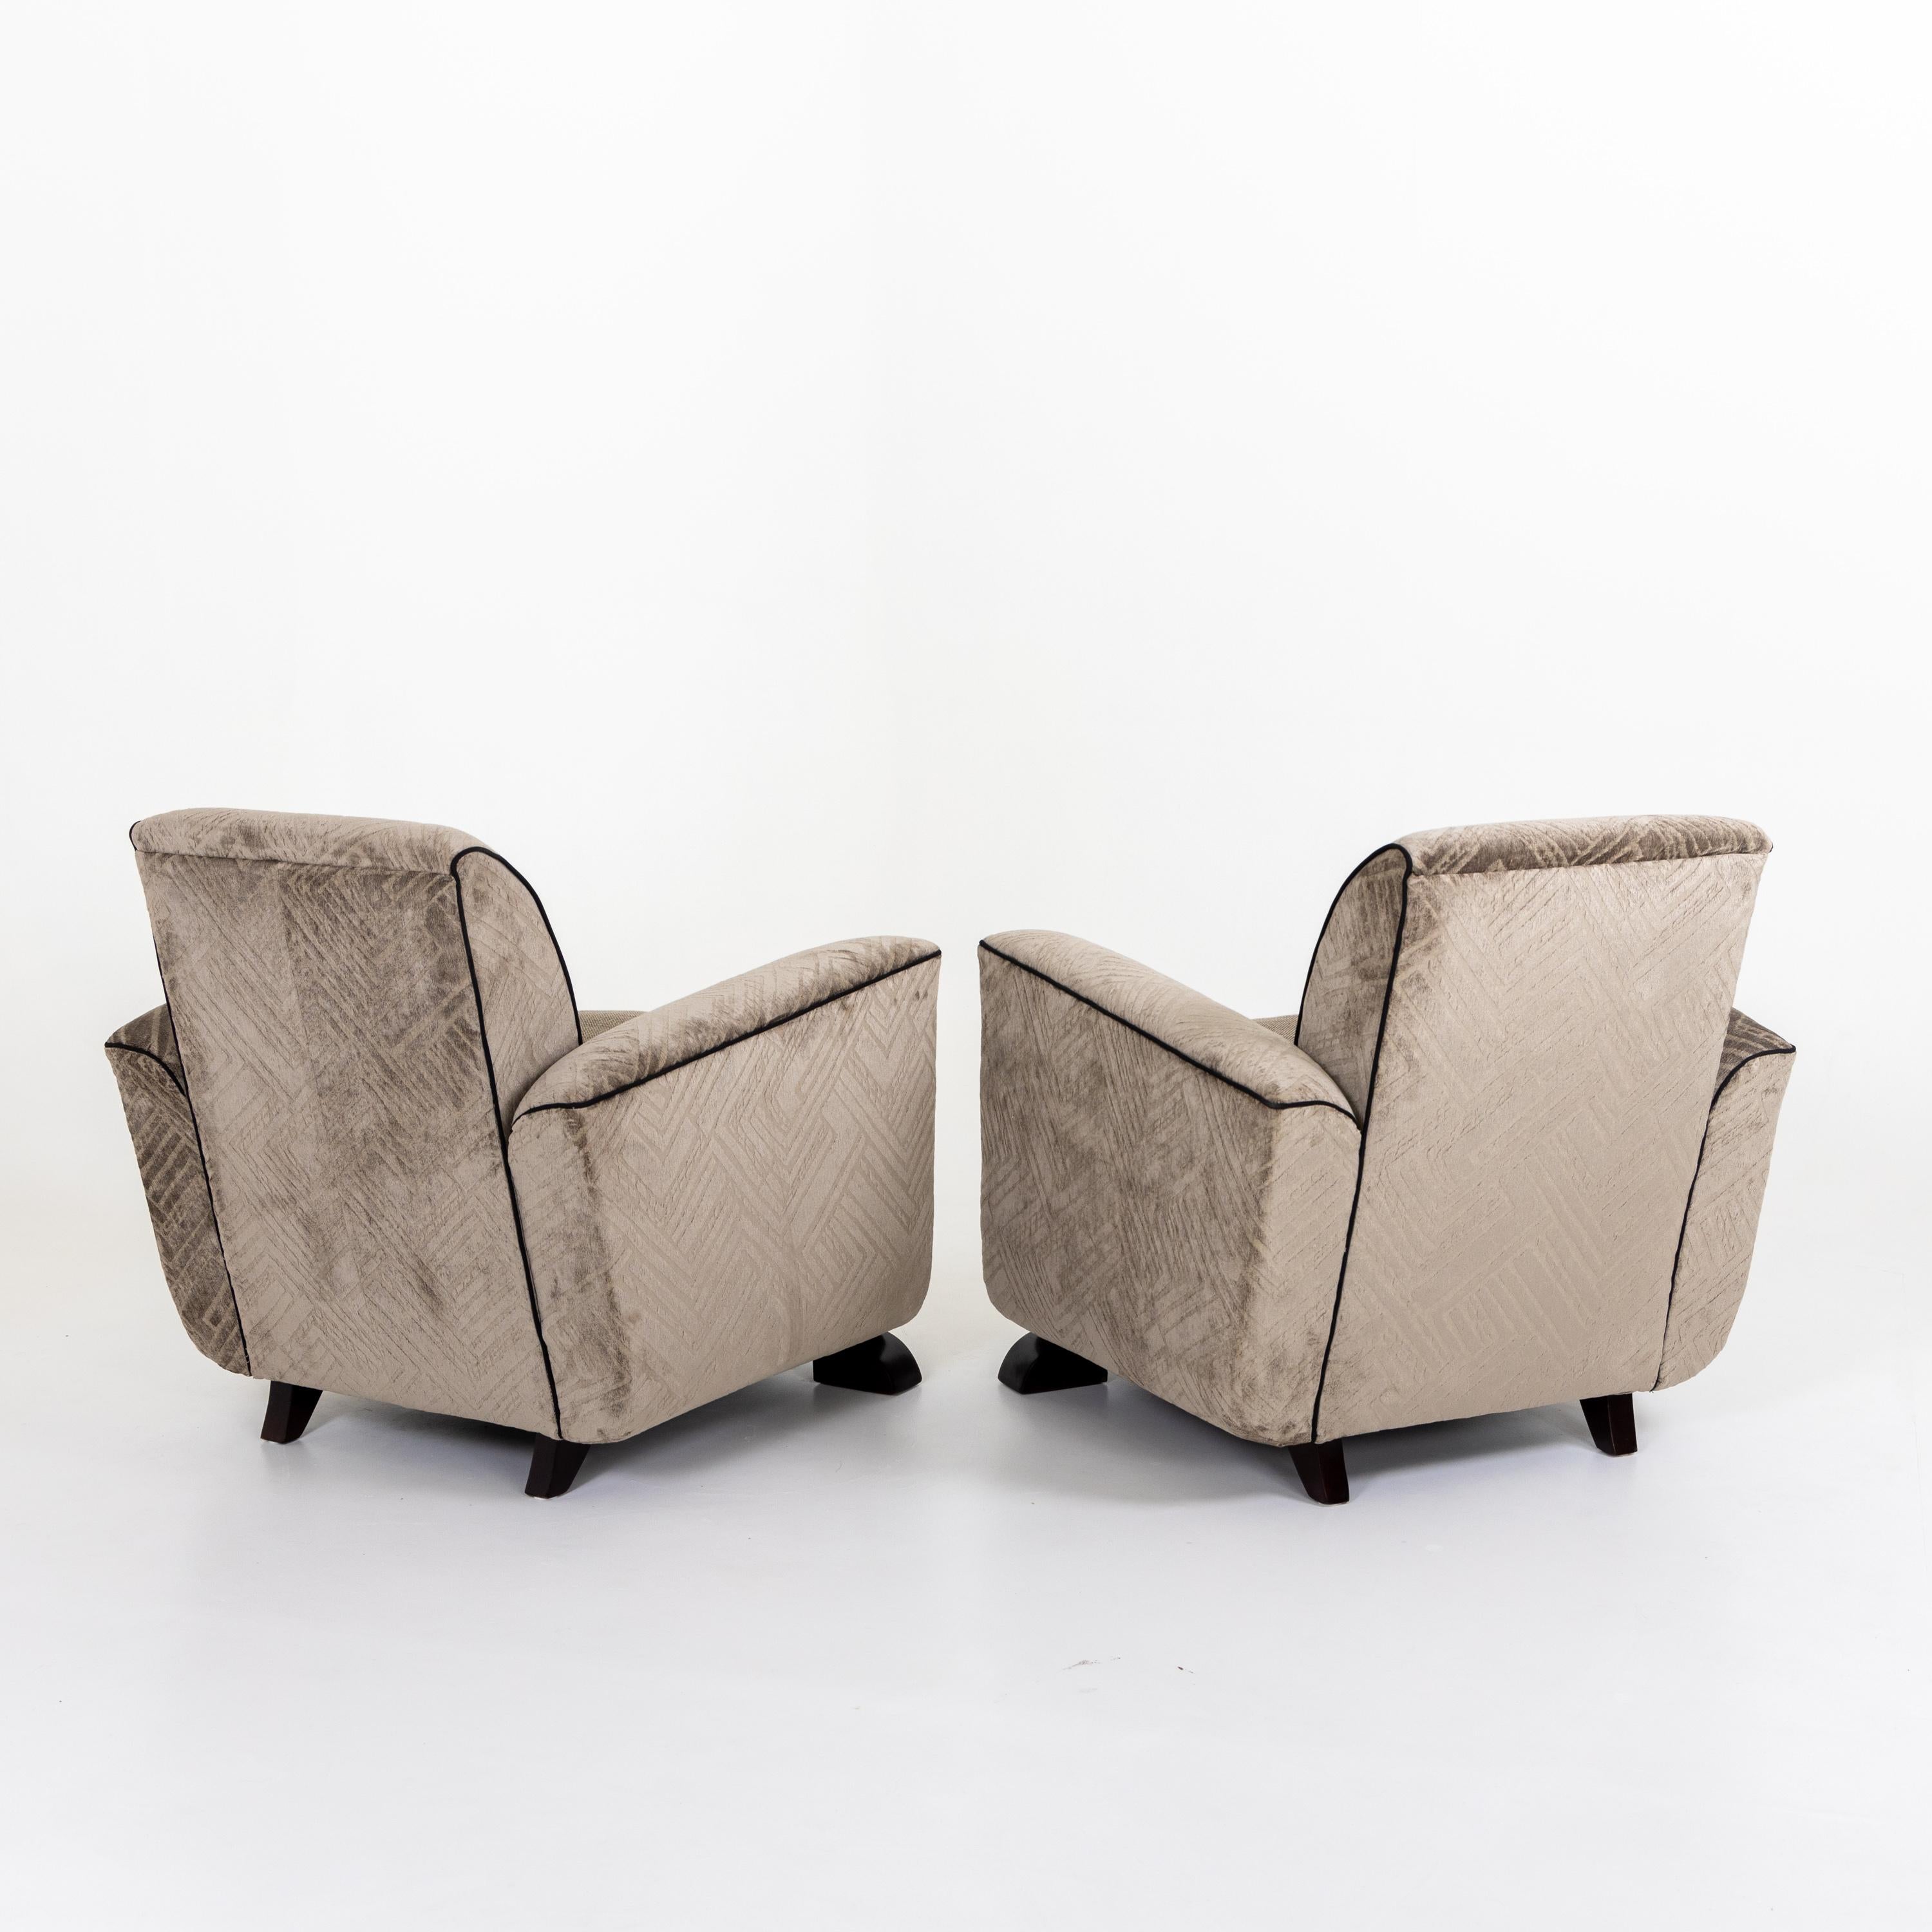 Fabric Pair of Art Deco Lounge Chairs, France, 1920s For Sale